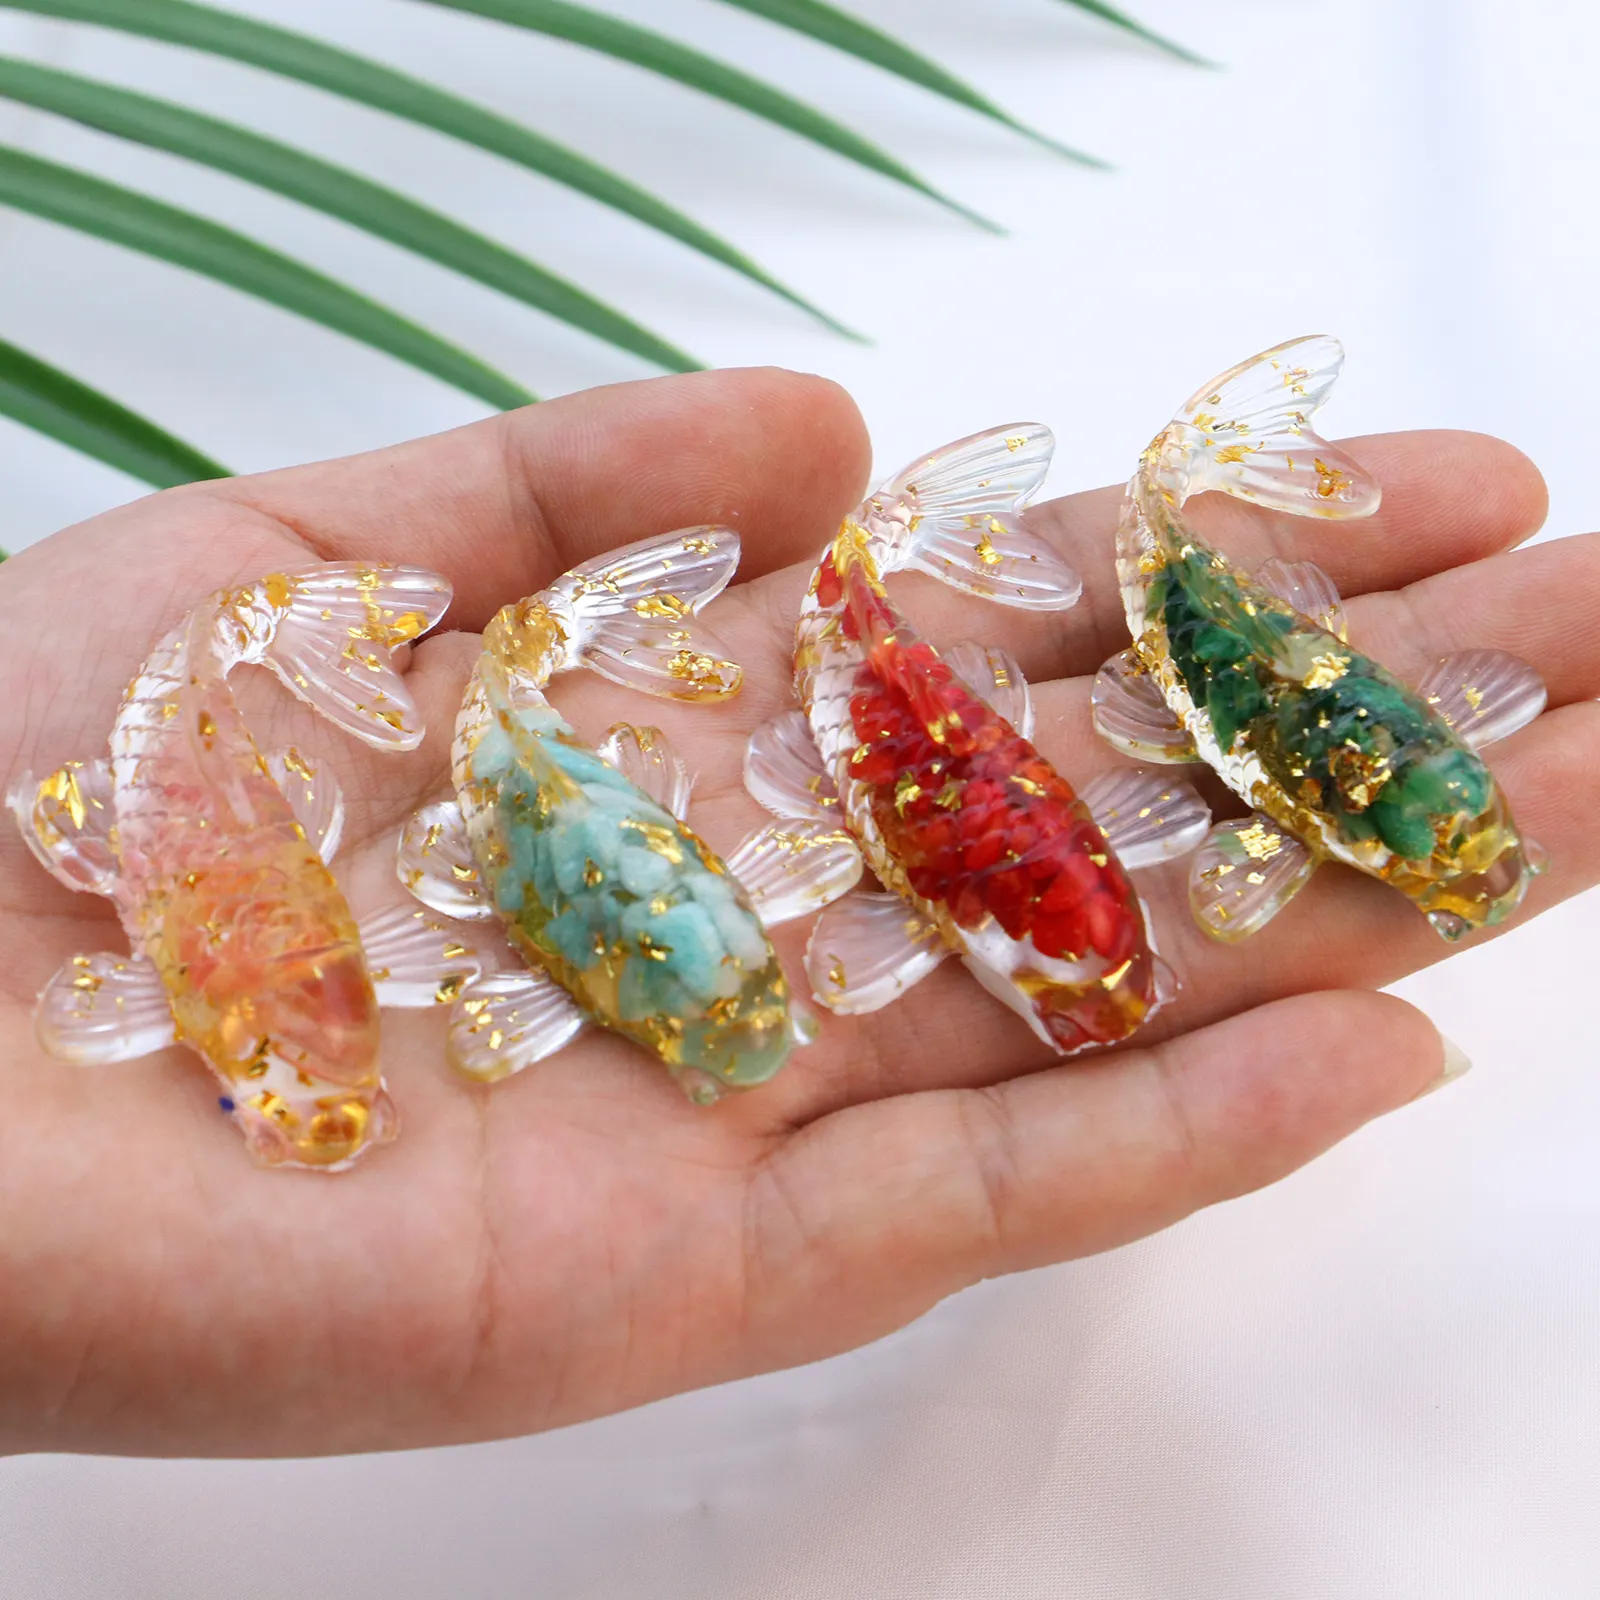 Real Healing Crystal Chips Fish Figurine Colorful Chips inside for decoration or wholesale